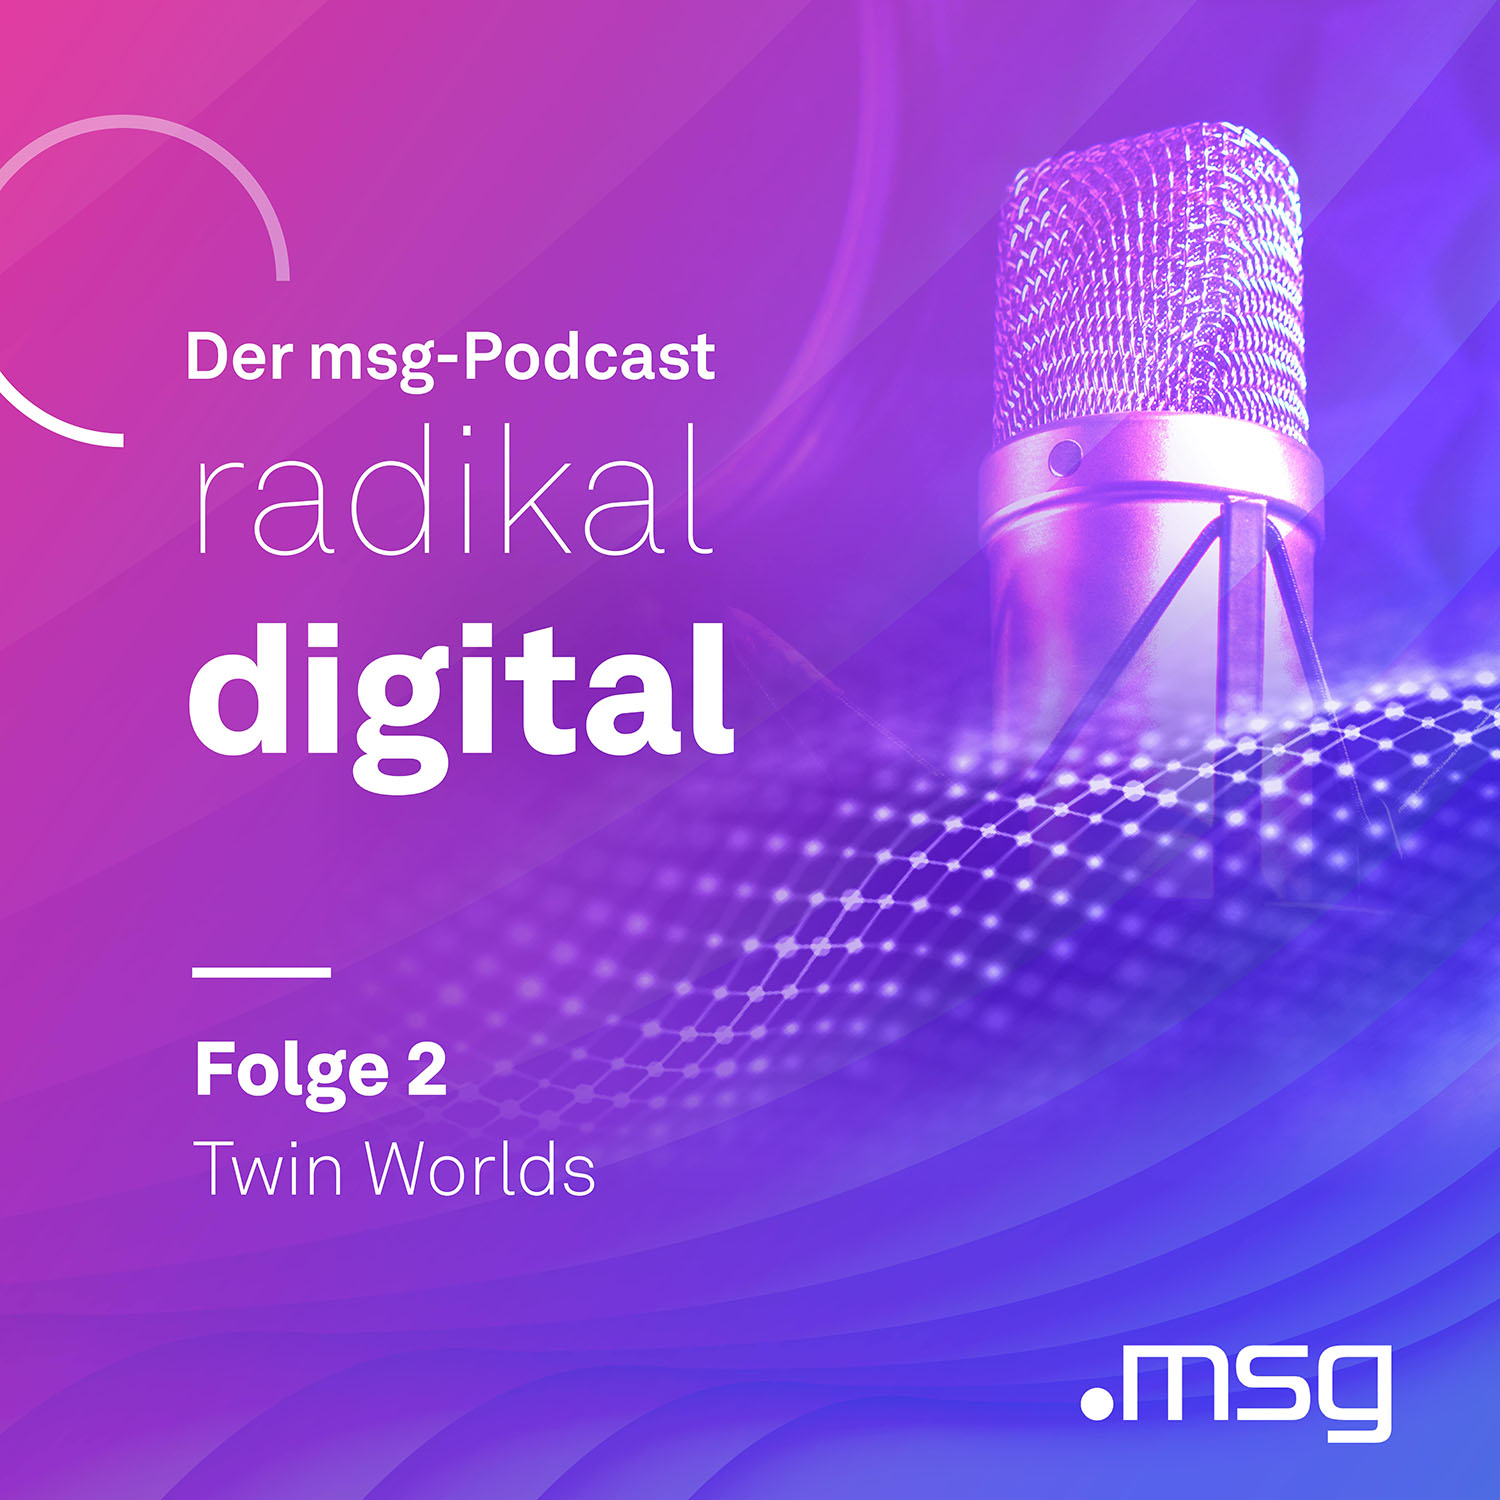 KeyVisual Folge 2 msg-Podcast Twin Worlds